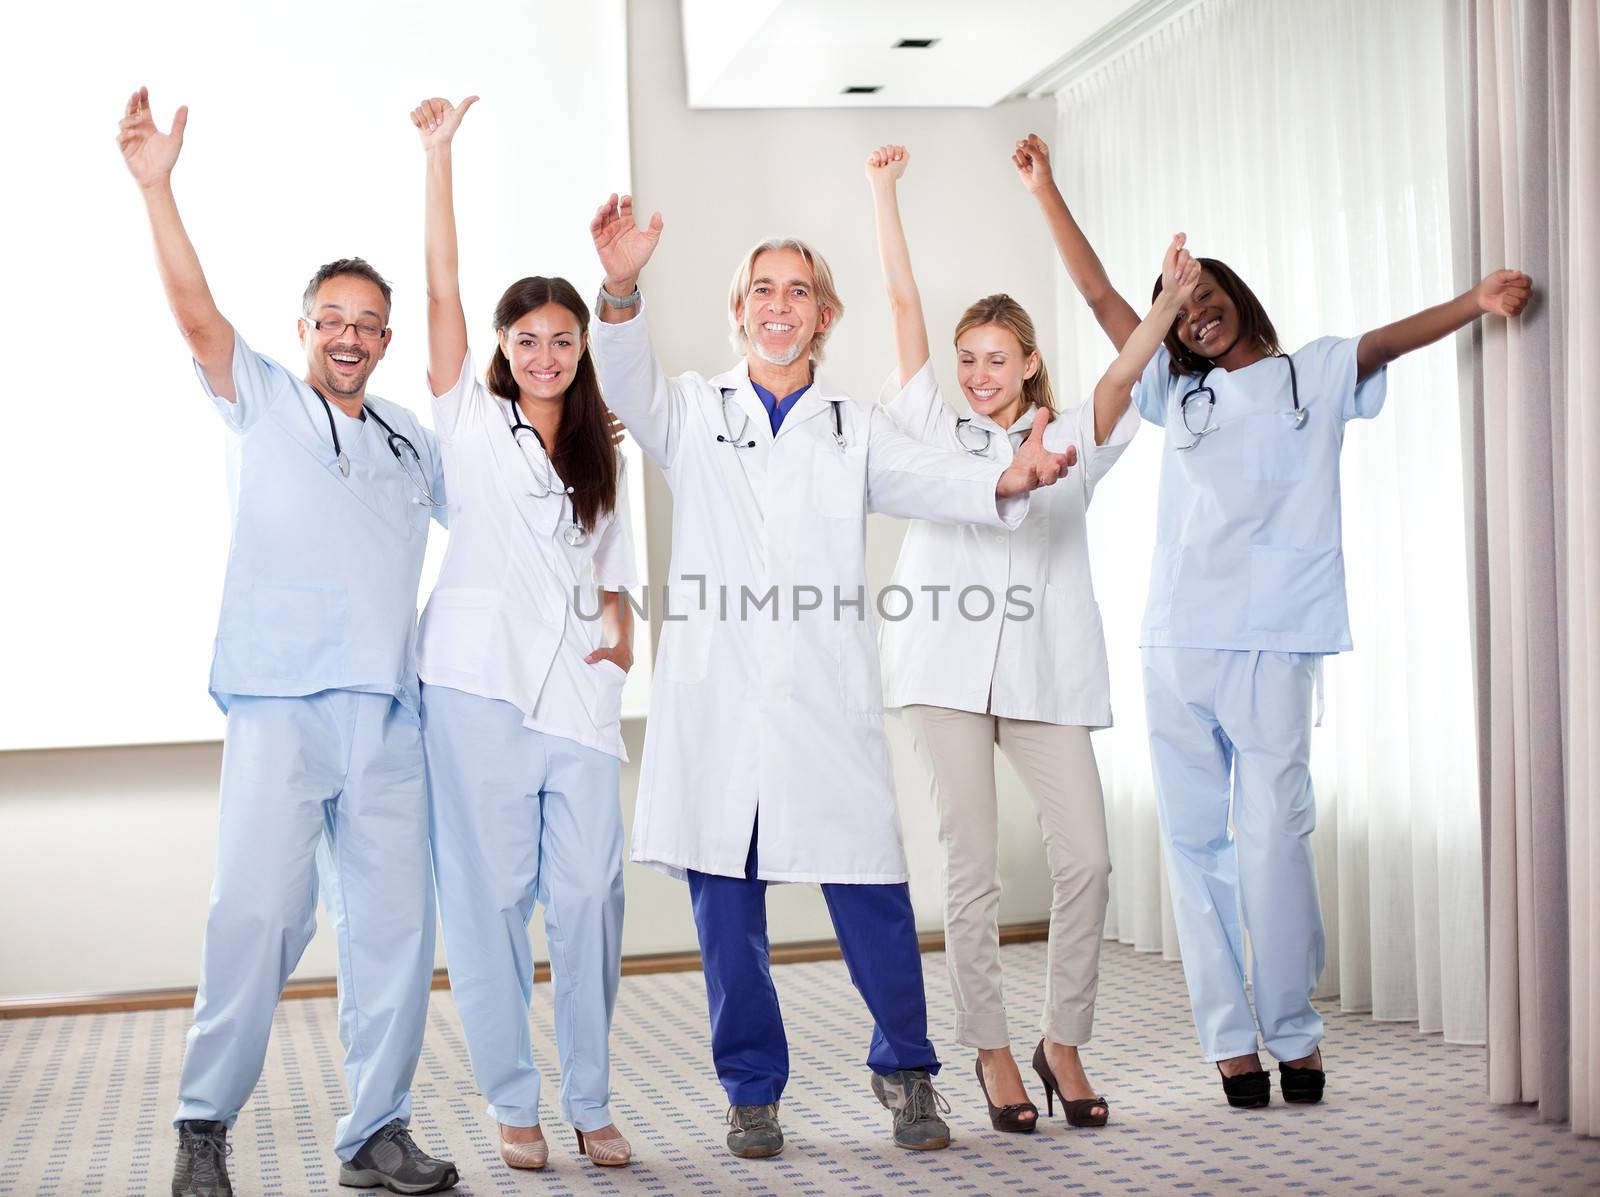 Group of happy doctors smiling and waving after a successful surgey at a hospital